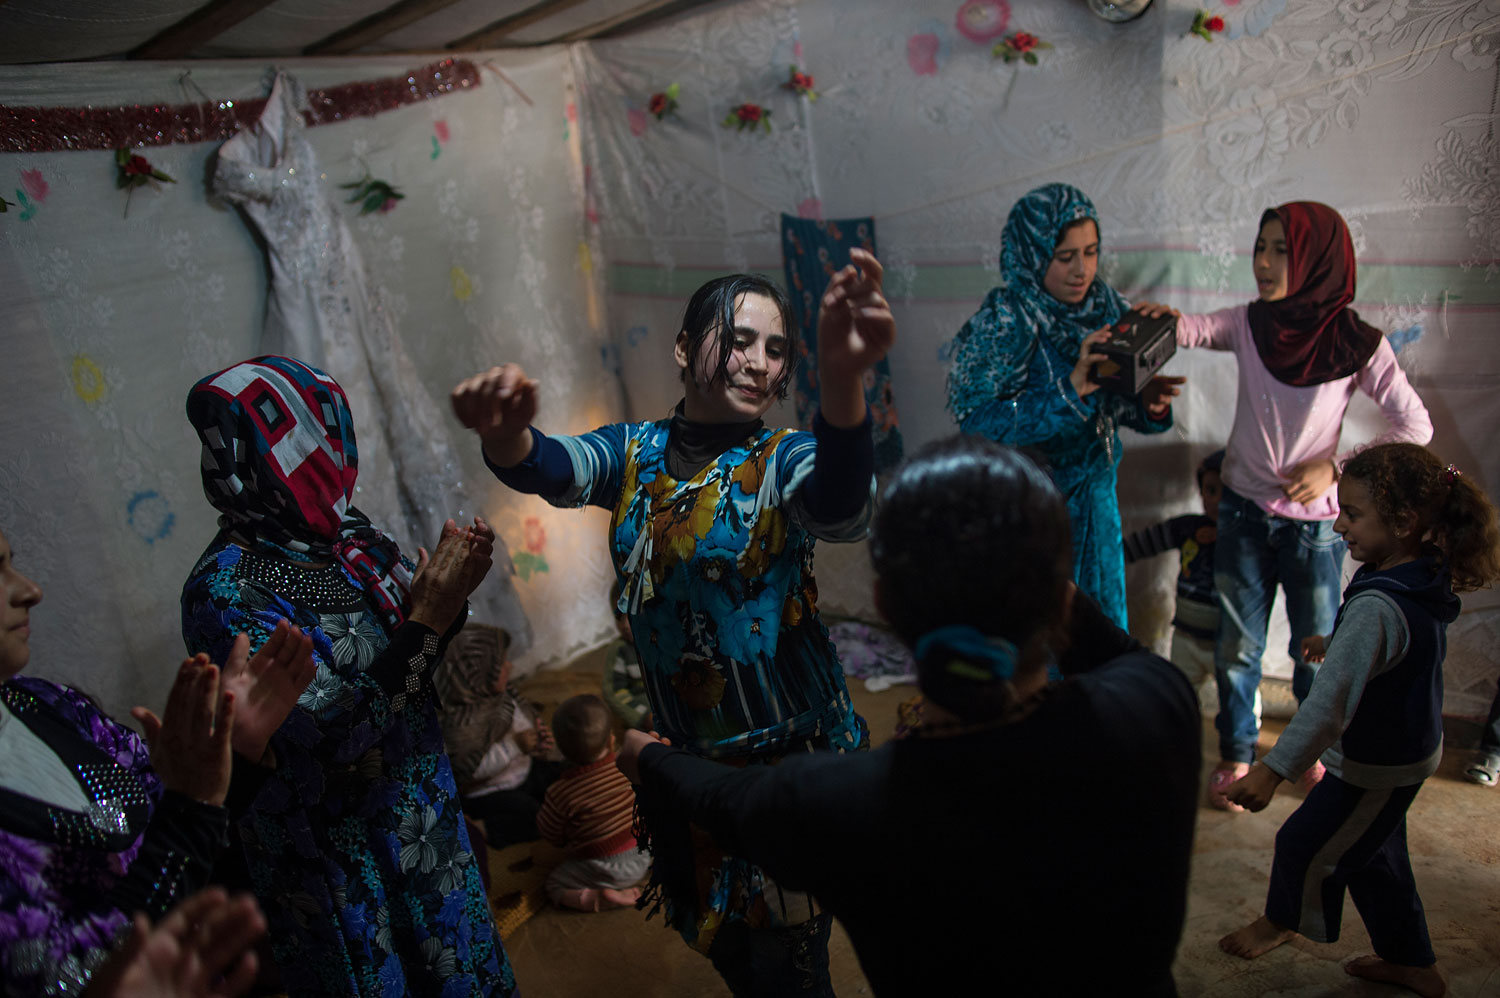 Female Syrian refugees dance around at a wedding celebration in a refugee camp in Marj El-Khokh, in Marjaayoun, Syrian, March 6, 2014. The bride, Yousra, 16, (not shown) was marrying Ahmed, 21, from East Ghouta, Syria. The father of the groom spoke about the wedding "we want to create life out of death and from sadness we want to create happiness. People should not continue to be morbid."